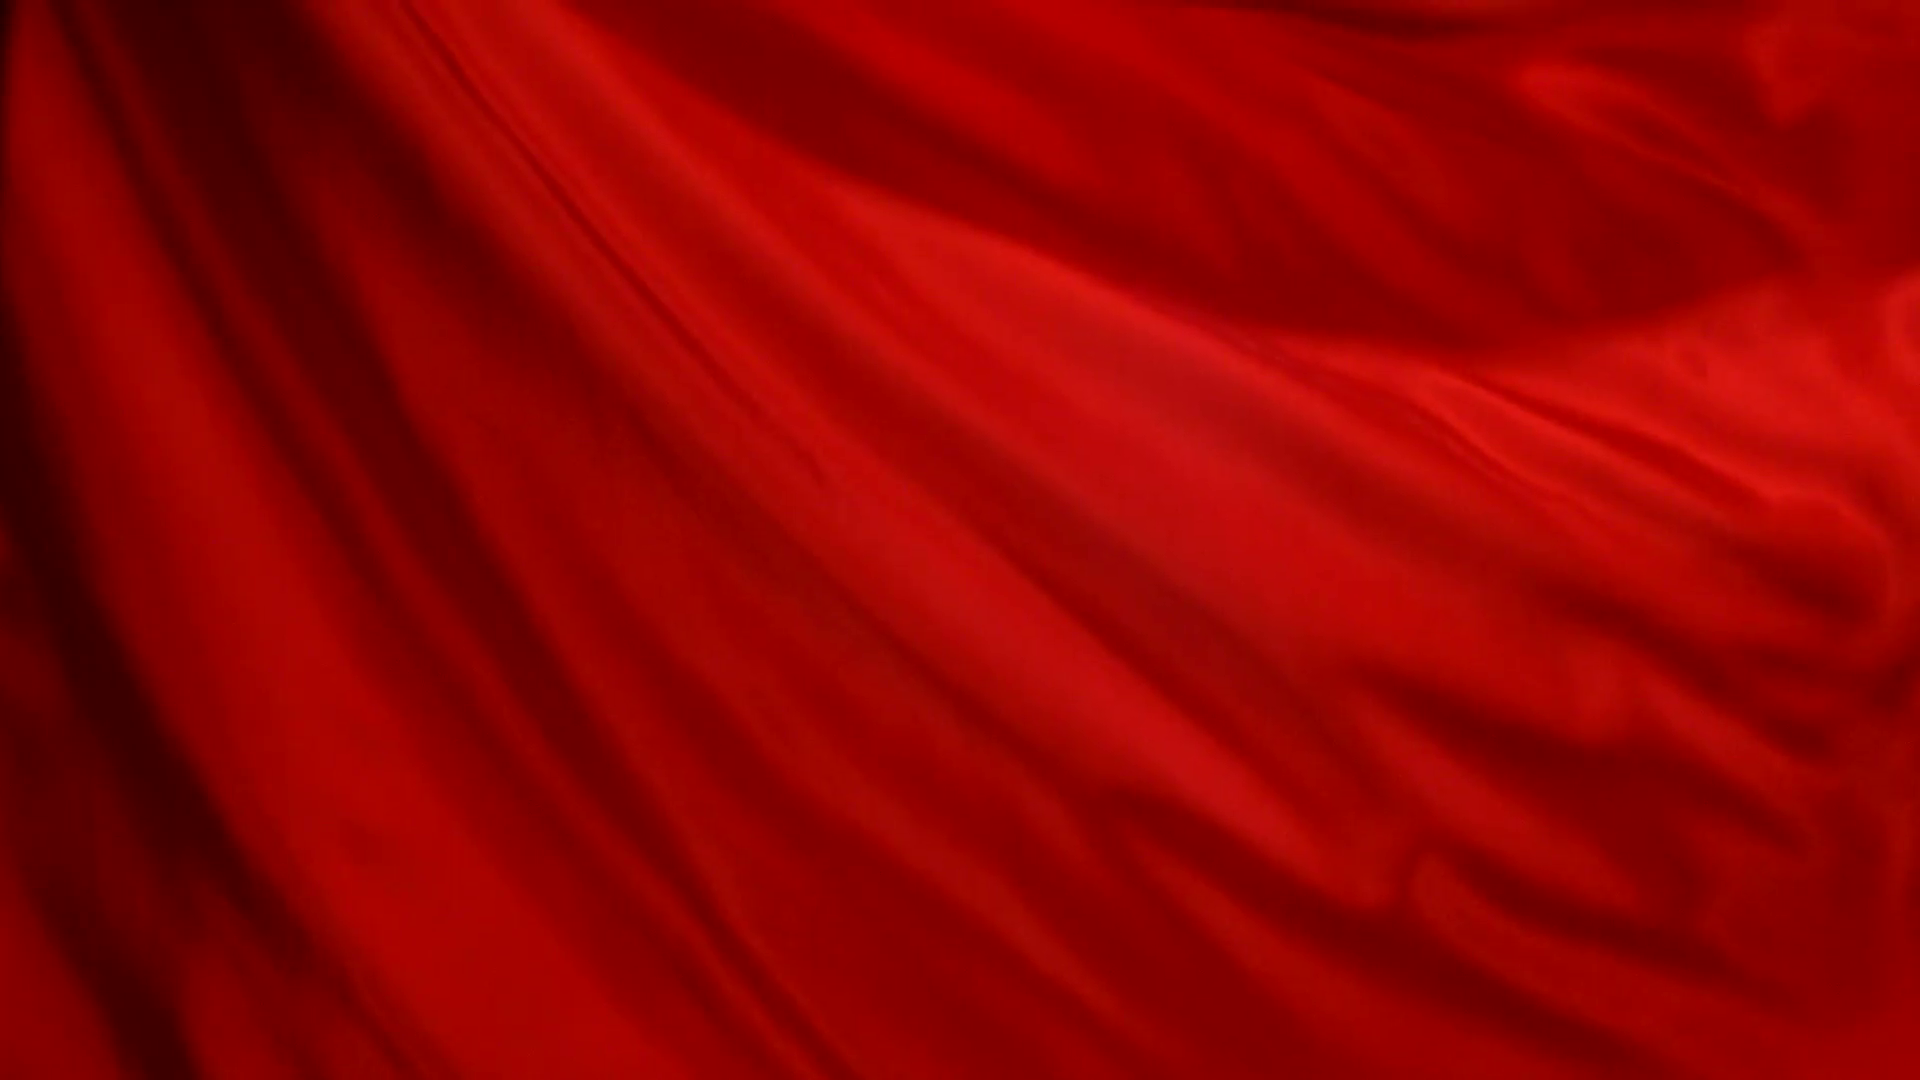 Flowing red cloth, Slow Motion Stock Video Footage - Videoblocks